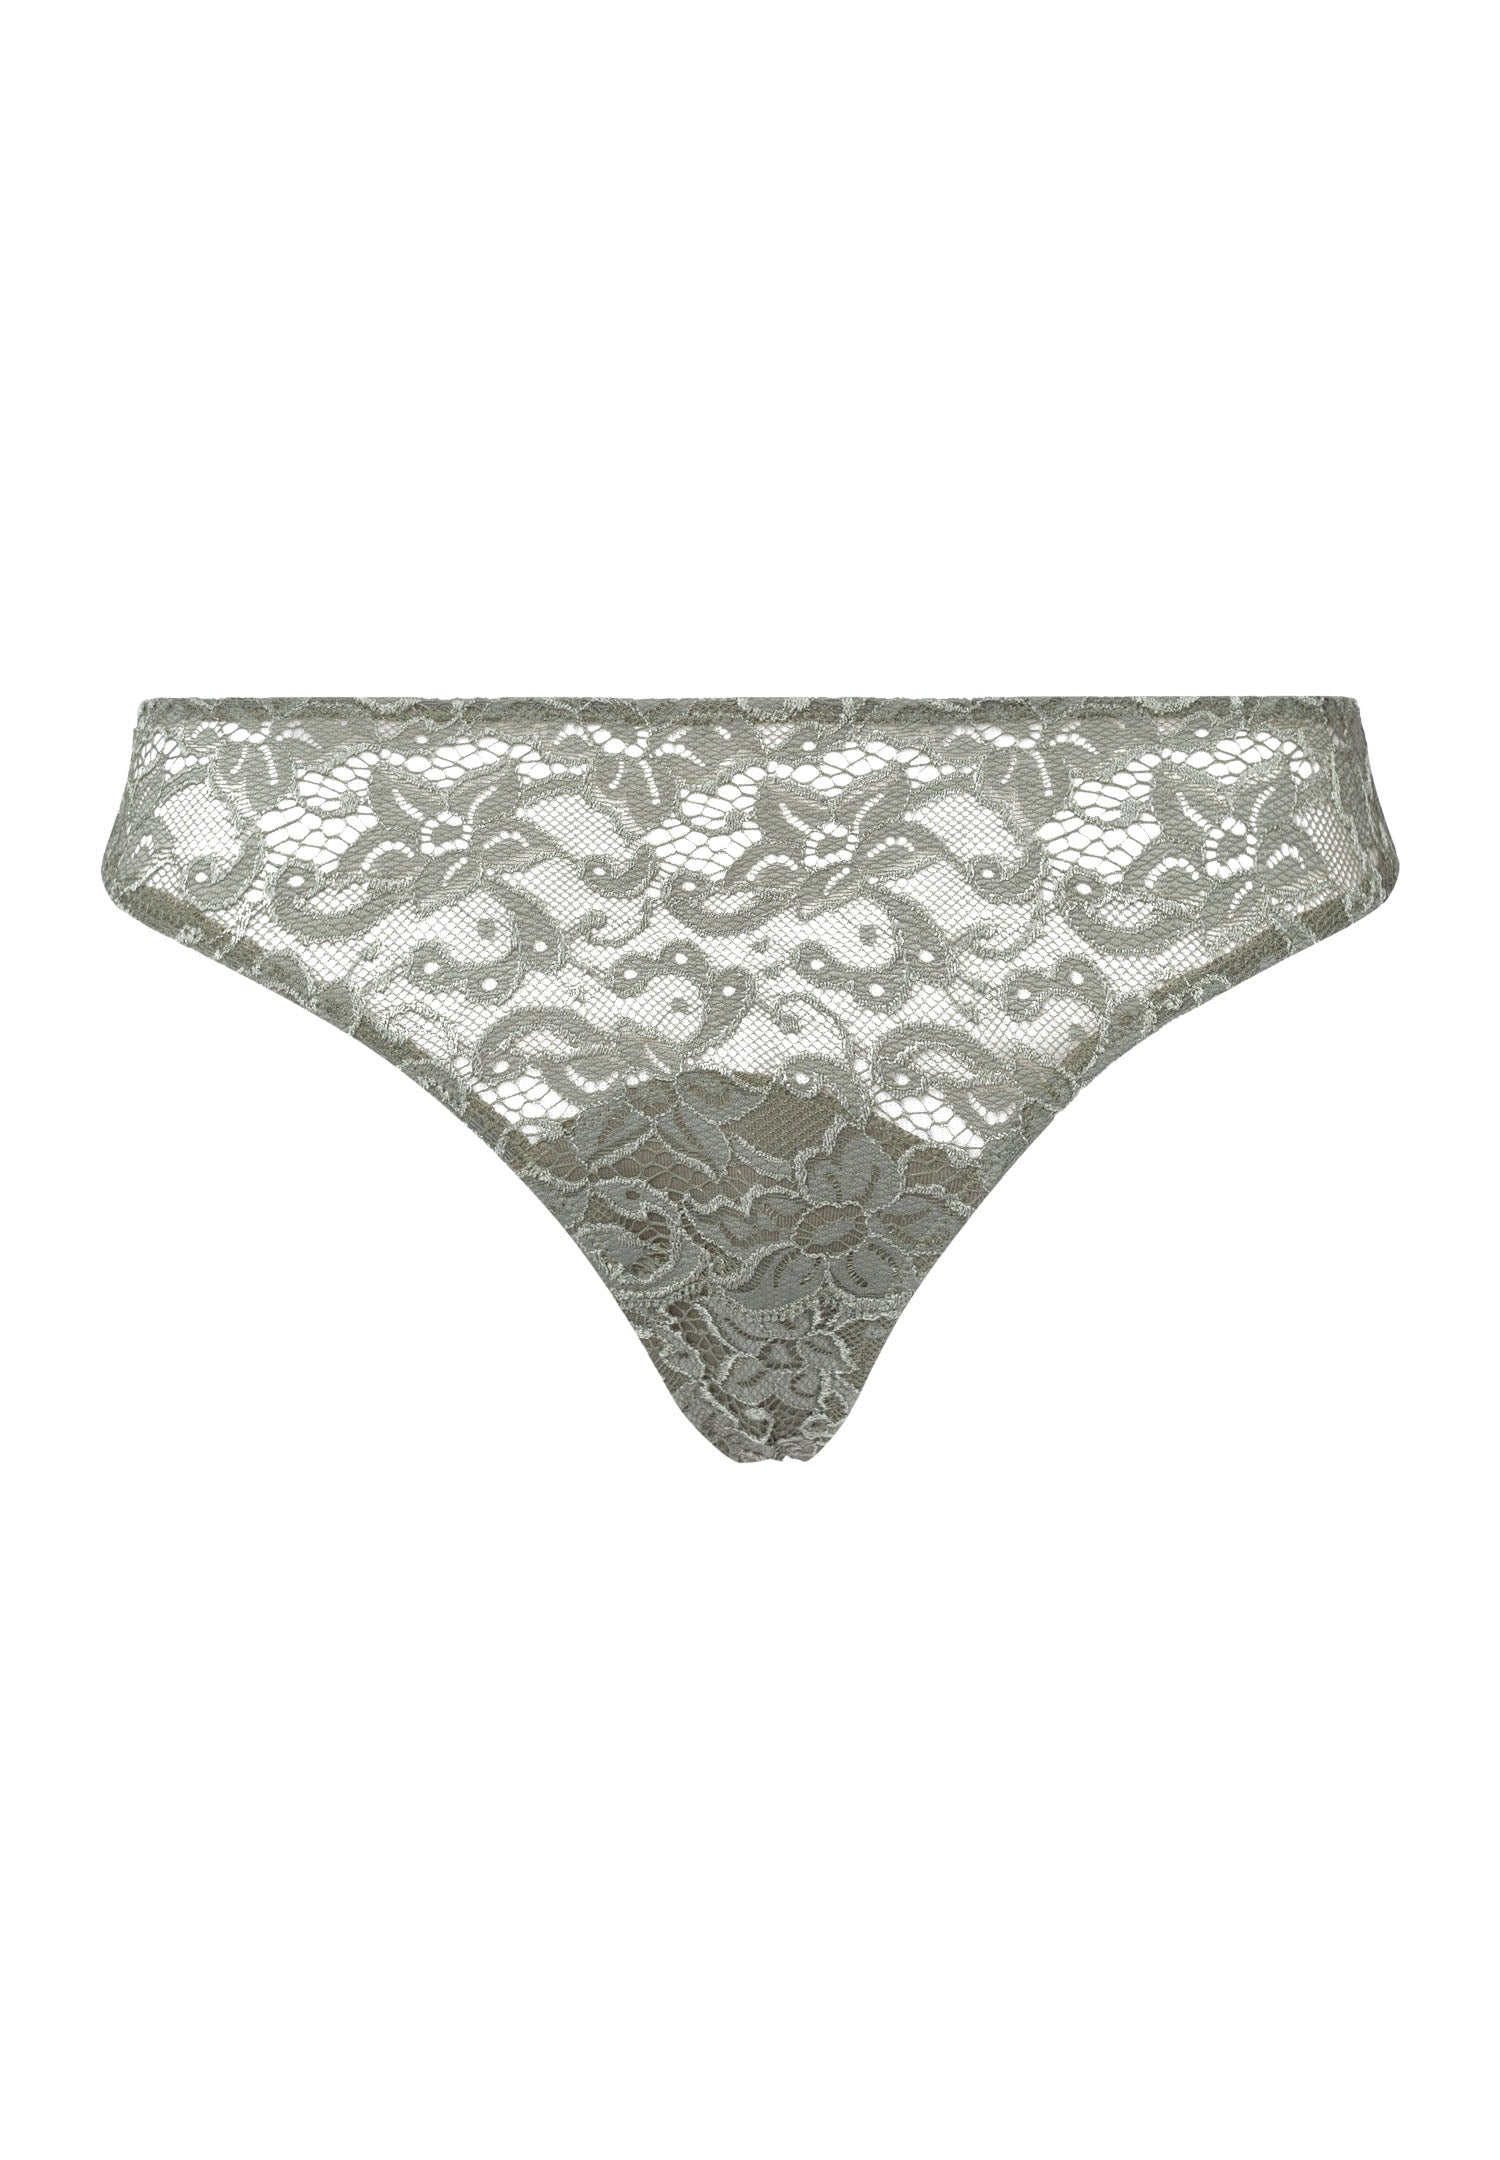 71507 Luxury Moments Thong - 2668 Antique Green